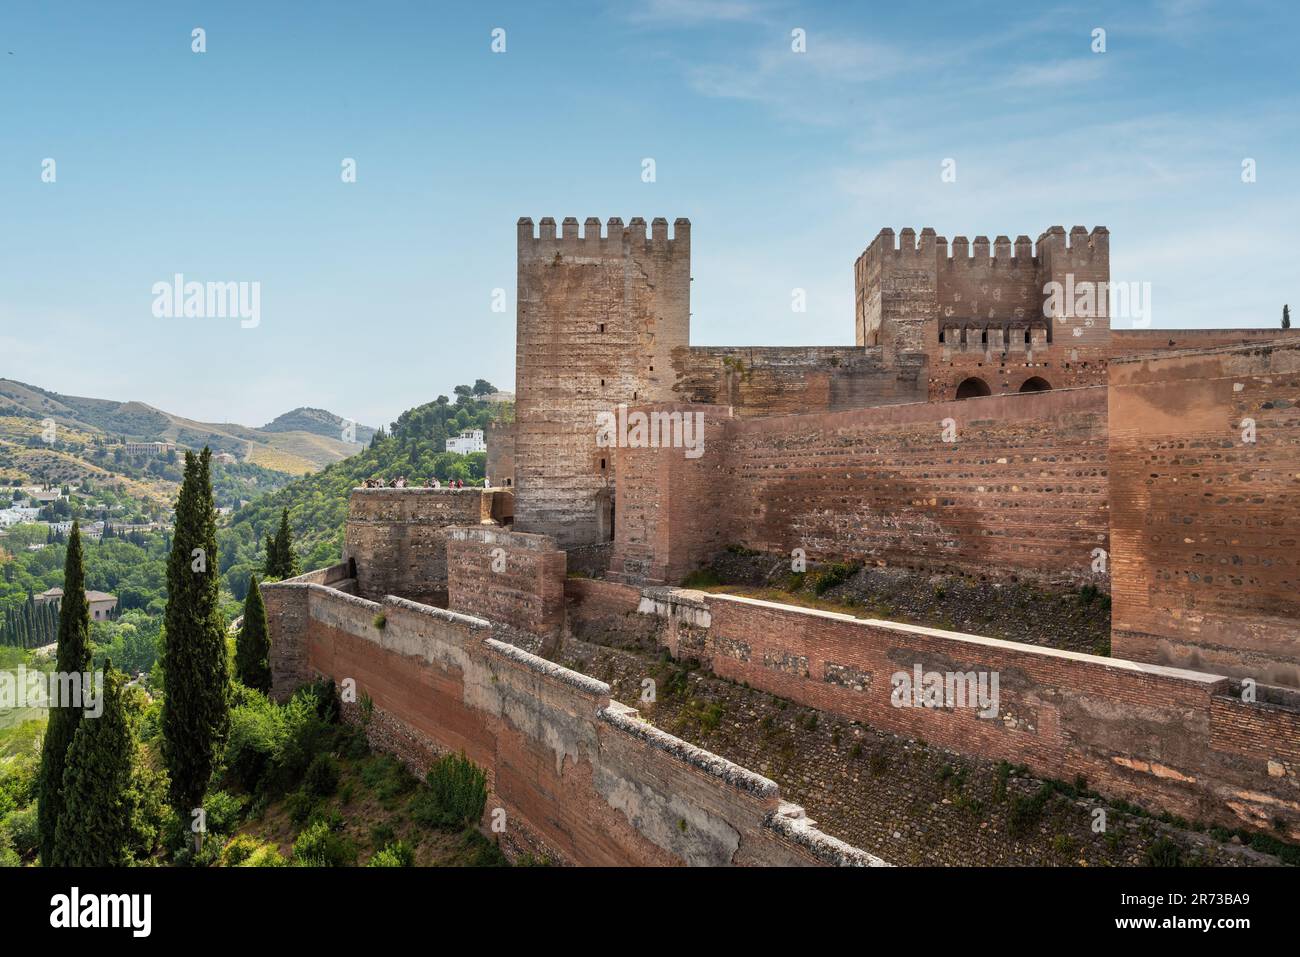 Alcazaba Fortress with Torre del Homenaje (Castle Keep) at Alhambra - Granada, Andalusia, Spain Stock Photo